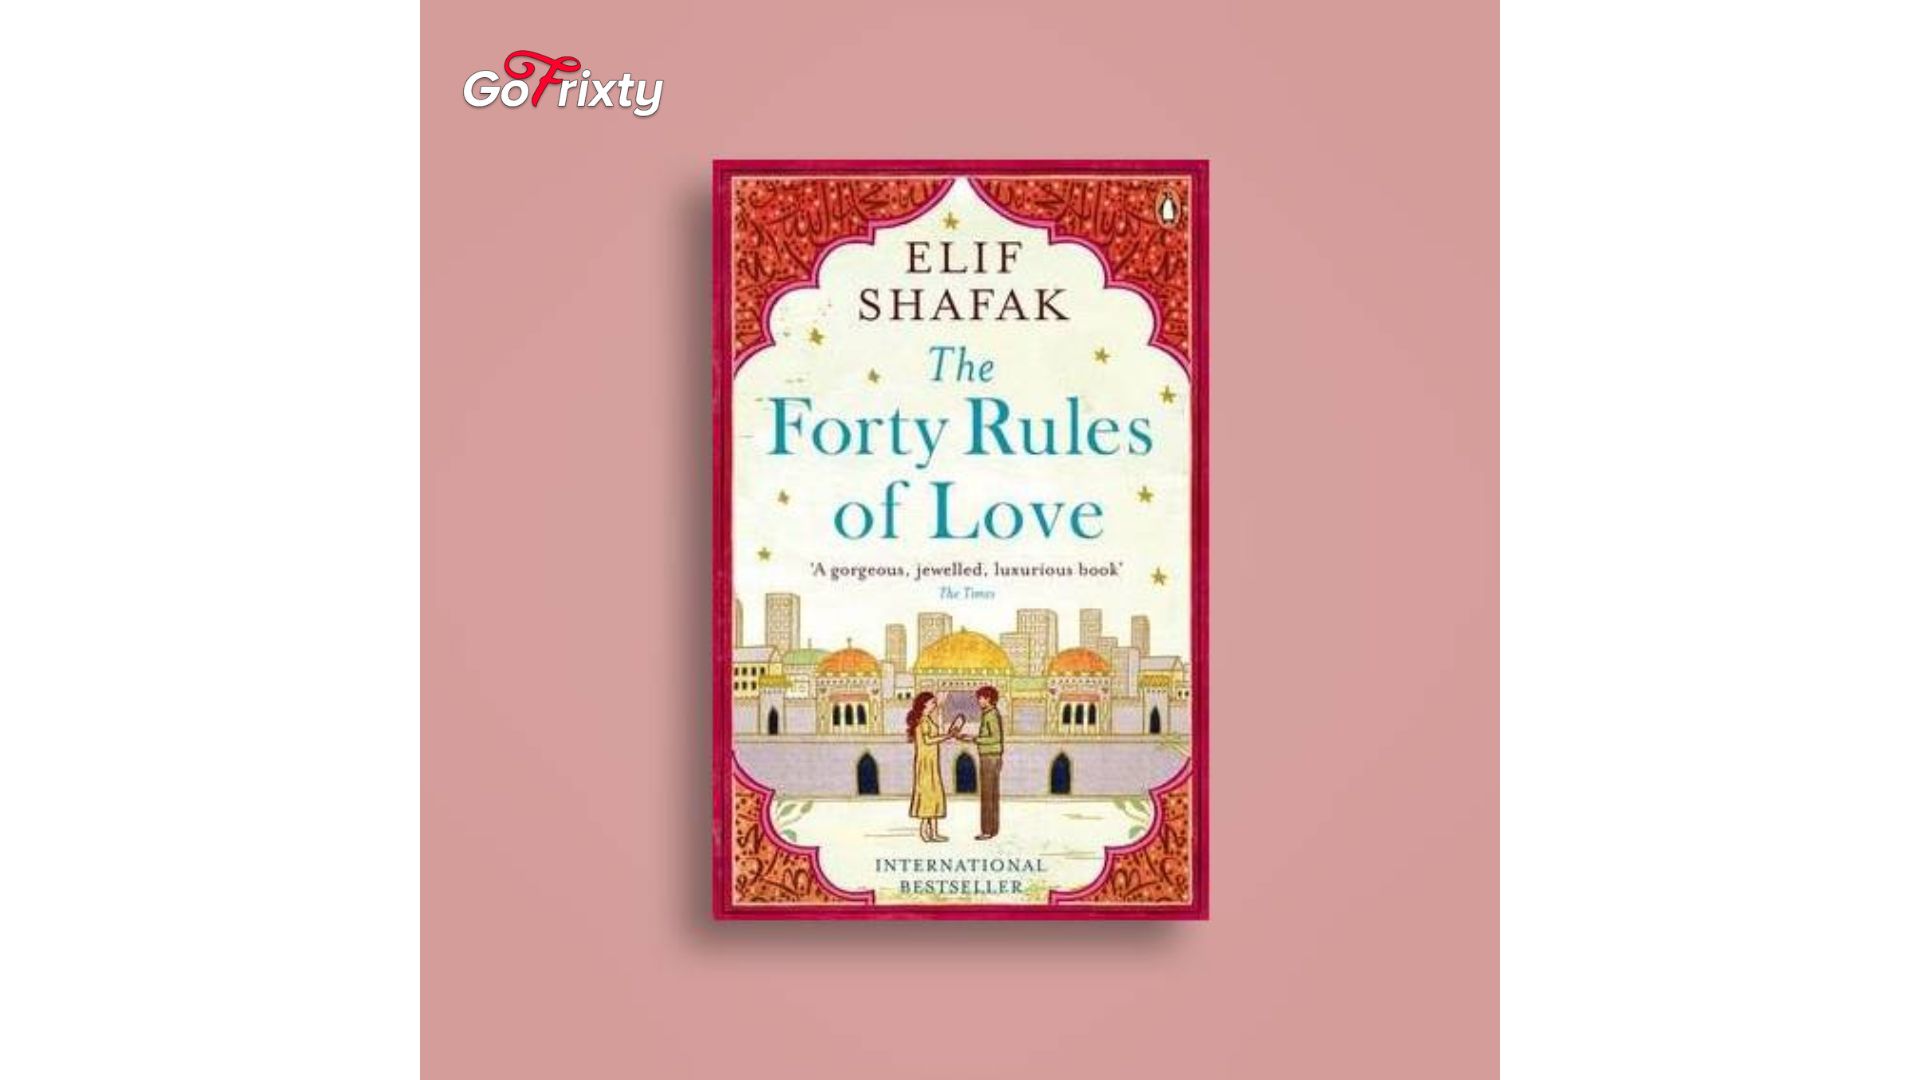 5 Reasons to Read The Forty Rules Of Love by Elif Shafak